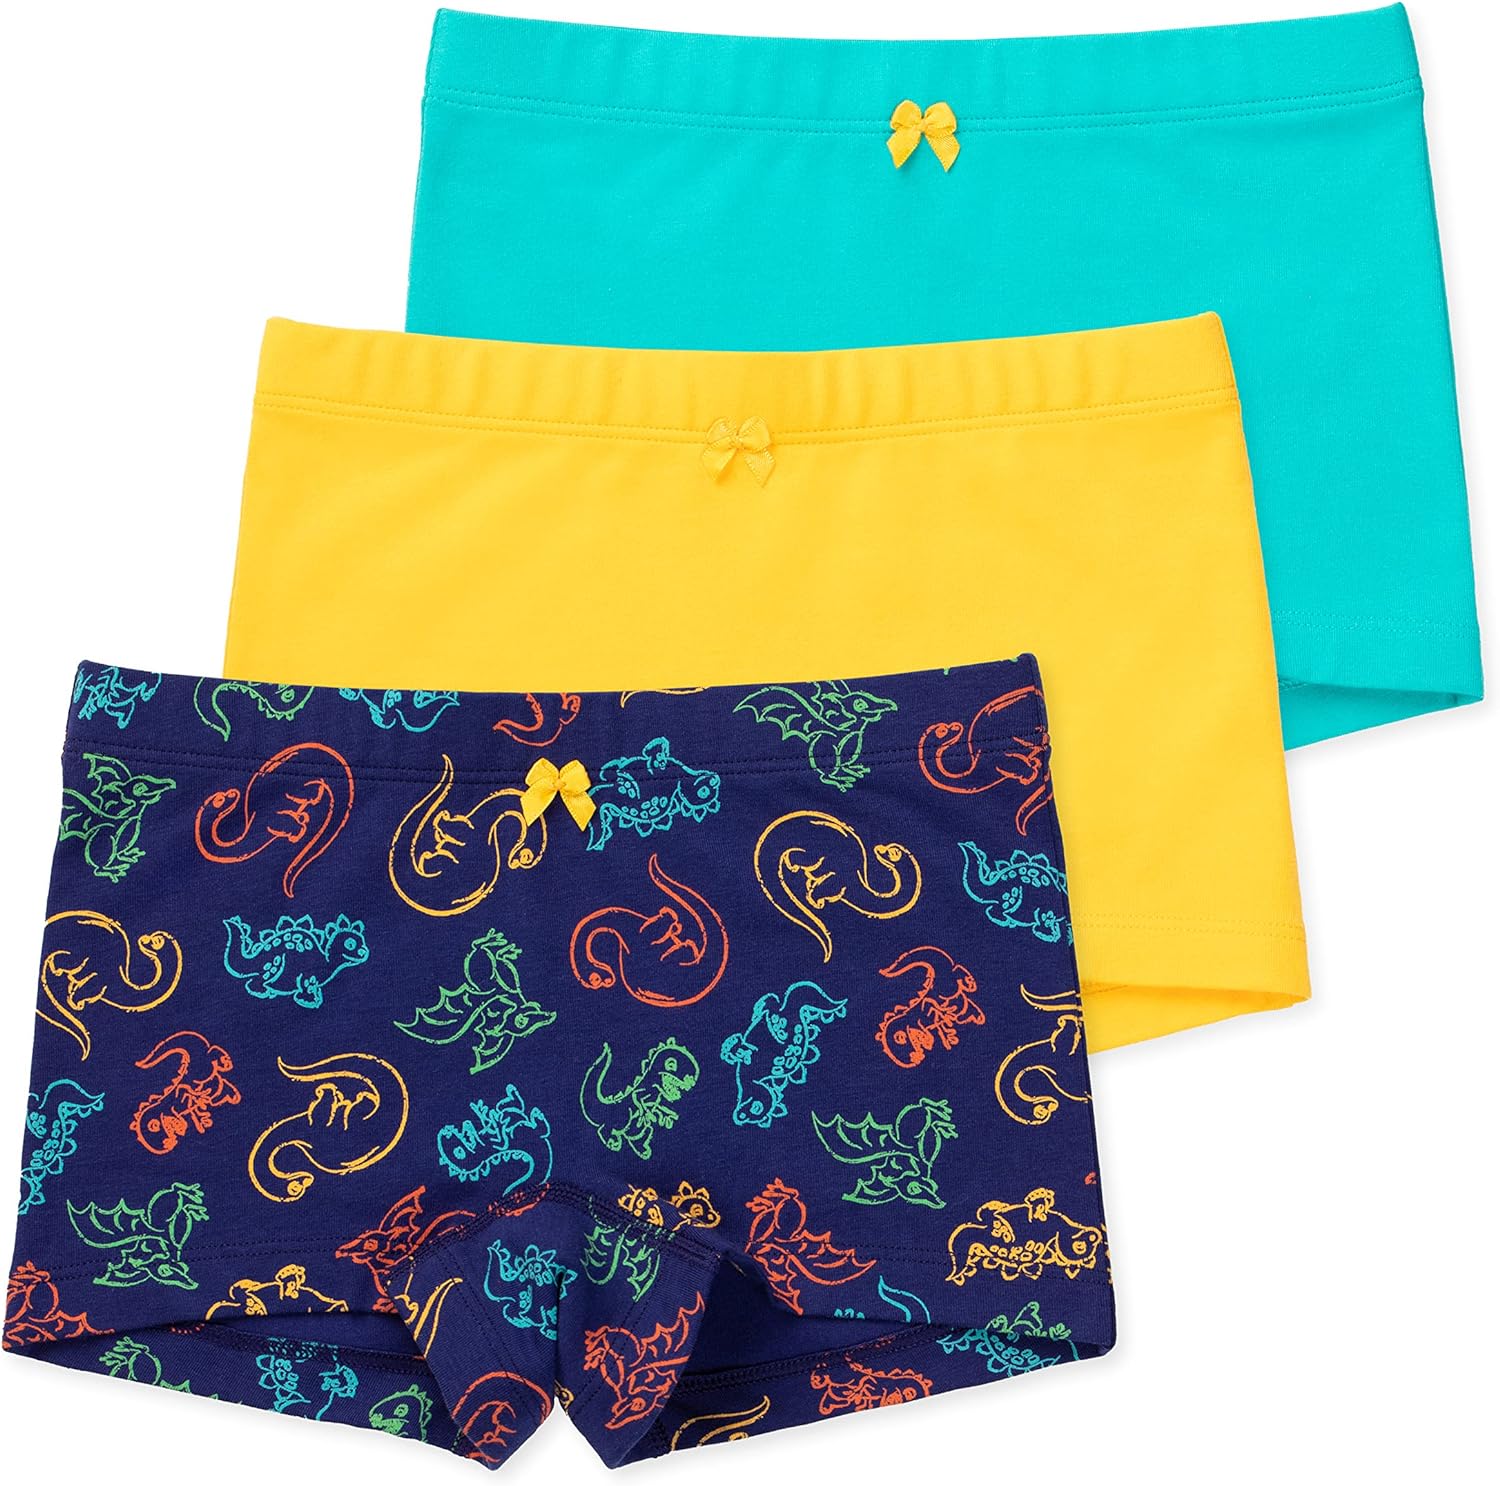  Lucky & Me Girls Undershorts For Under Dresses And